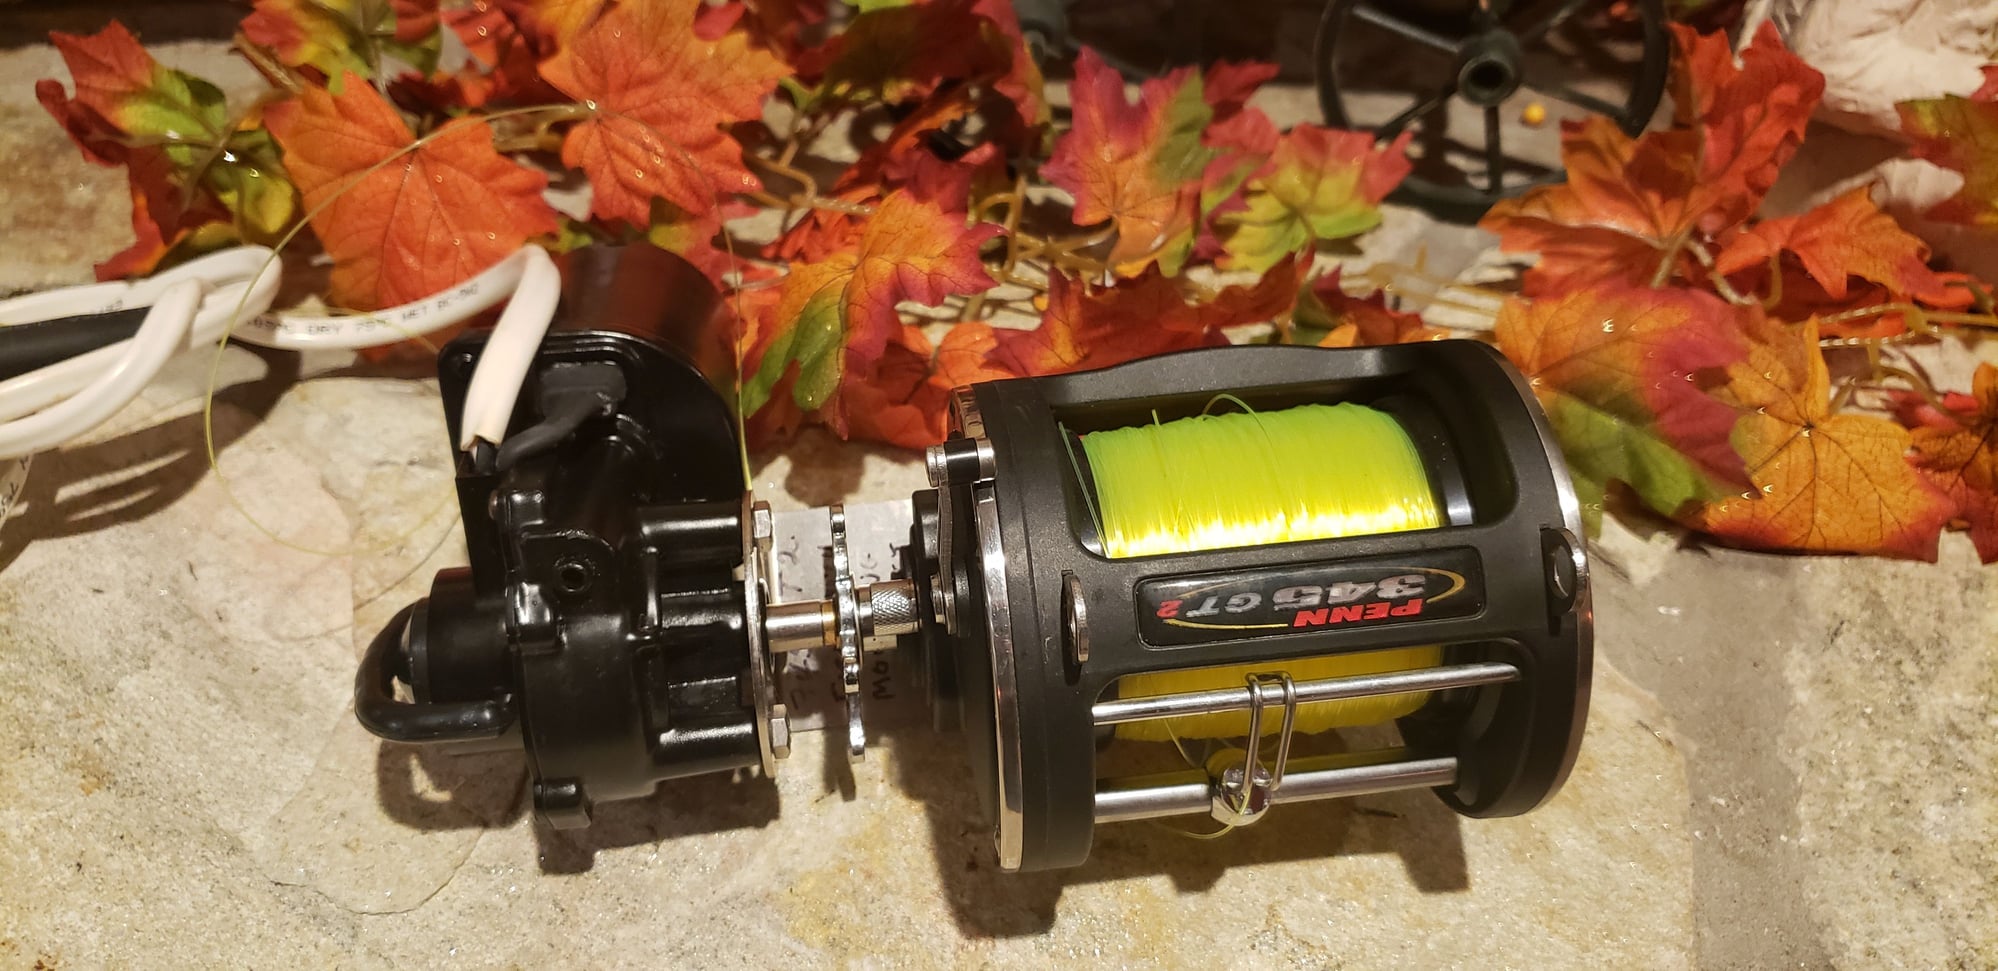 Fish winch with Penn 345GT2 - The Hull Truth - Boating and Fishing Forum